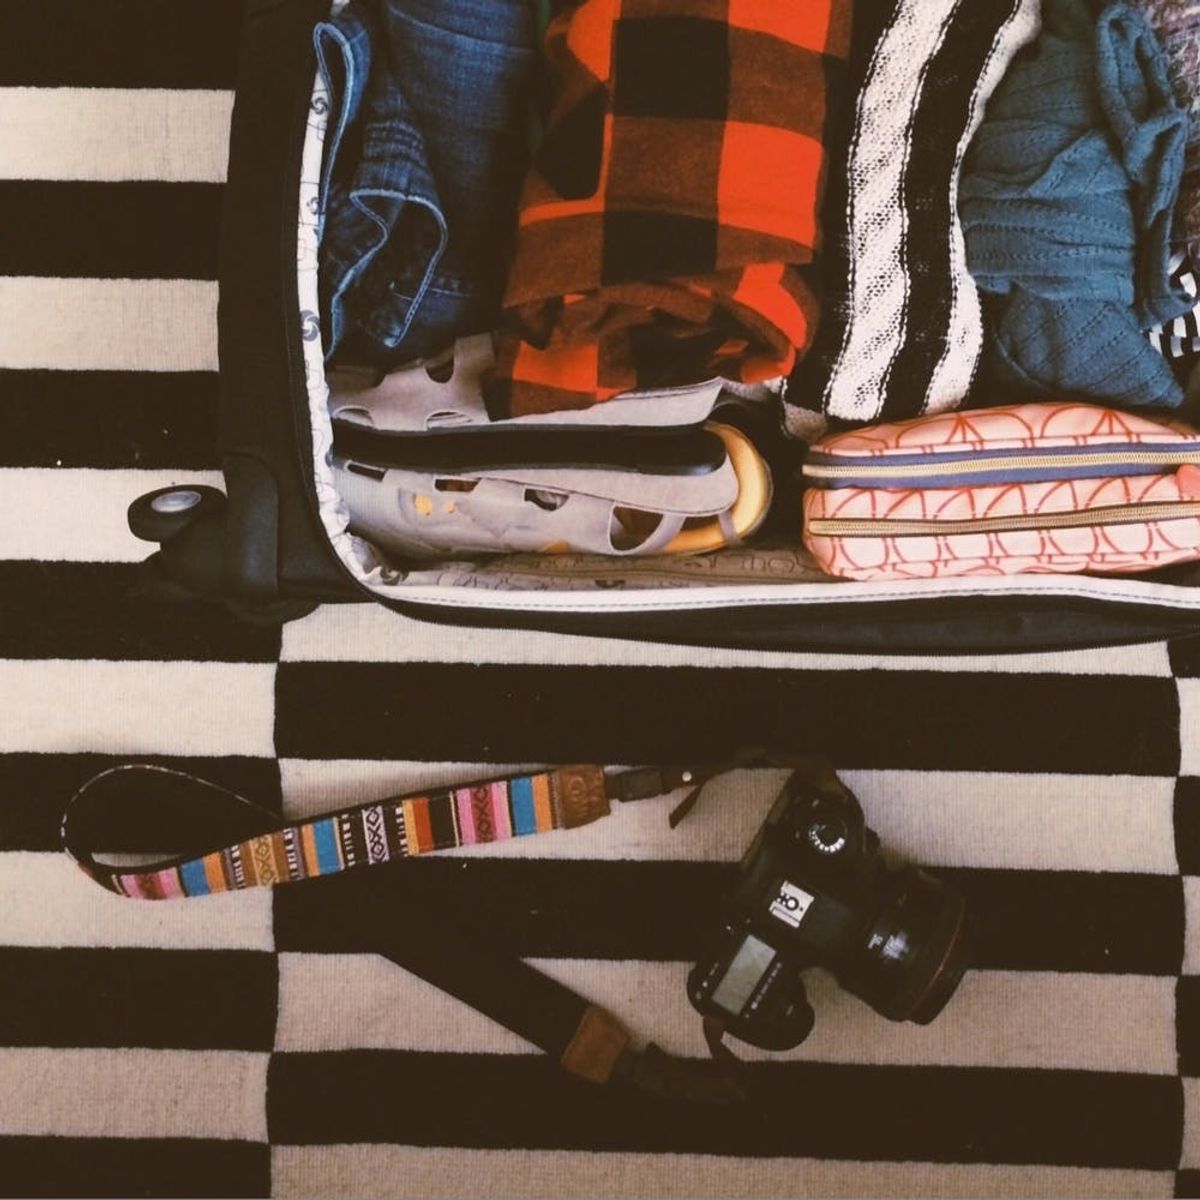 5 Unnecessary Items Weighing Down Your Suitcase